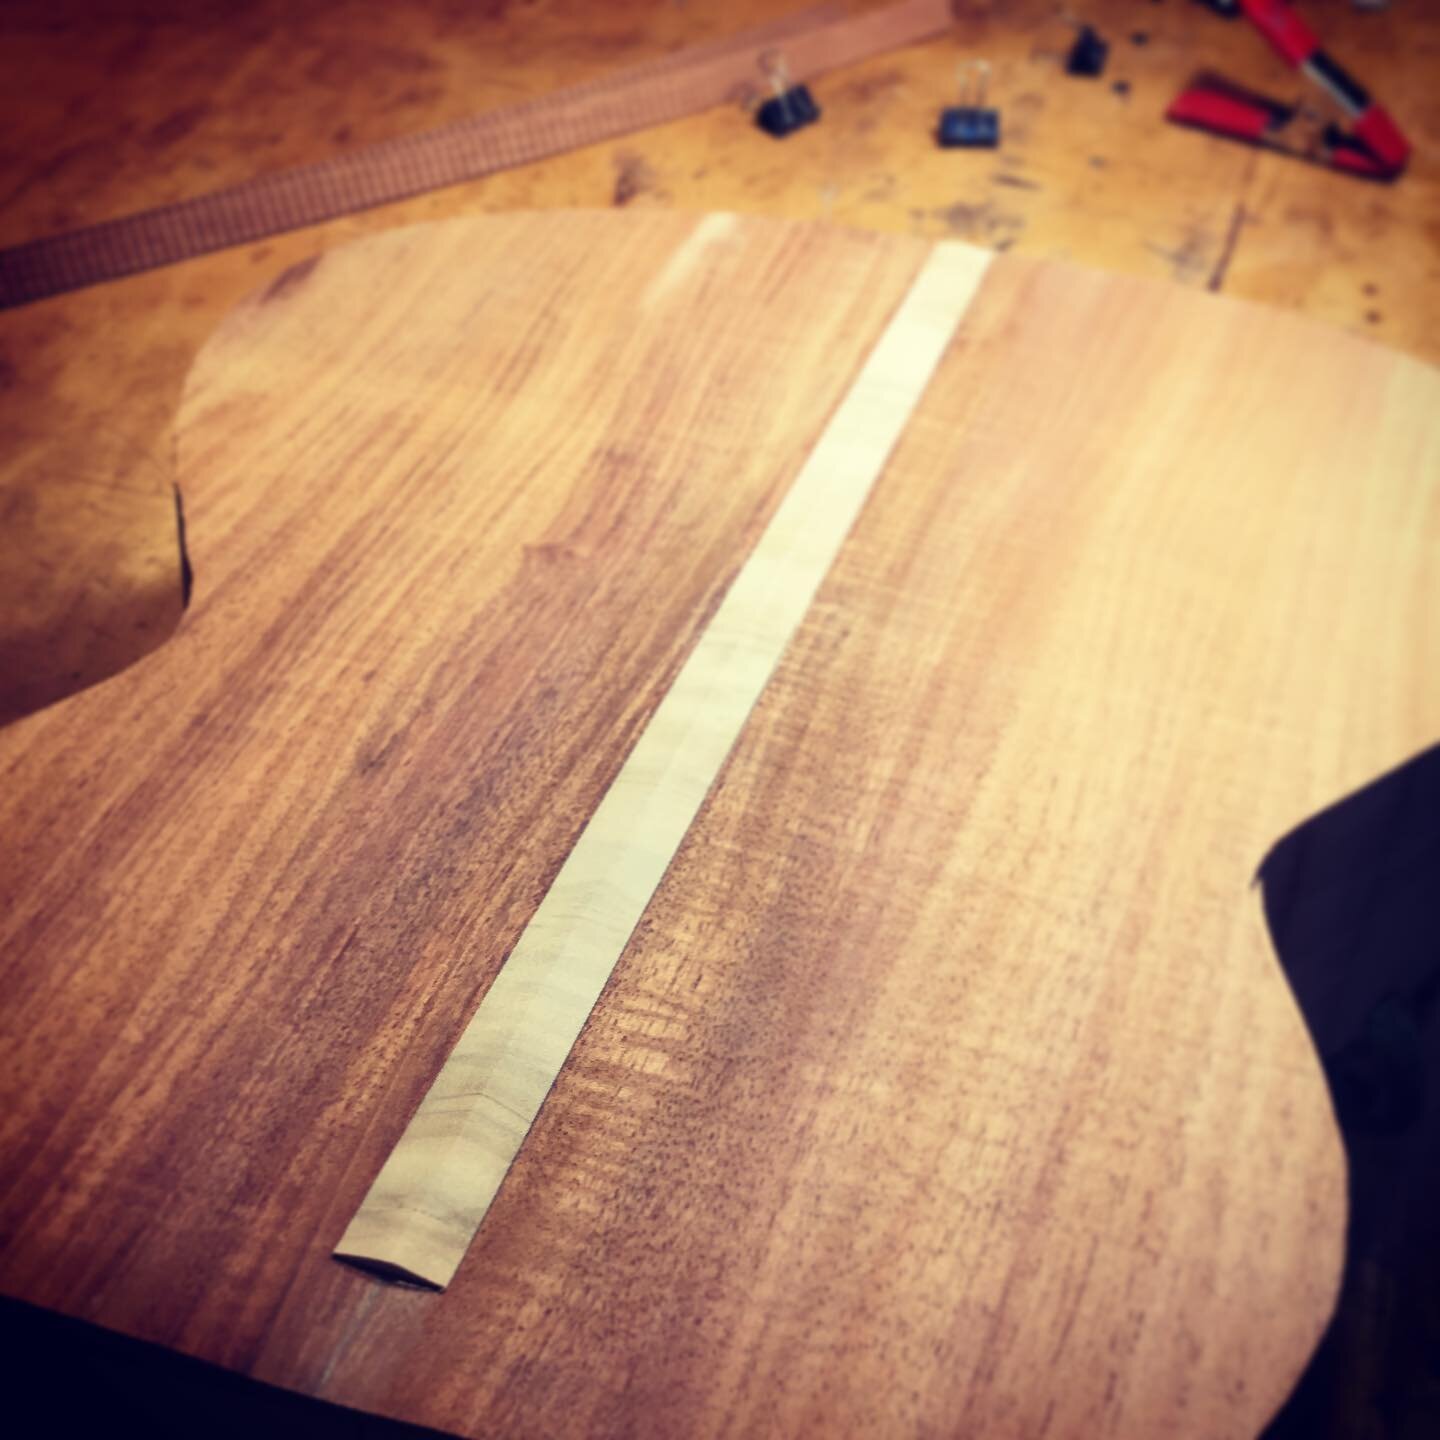 Happy Canada Day!
A red and white shot. 
Hawaiian koa back prepped for bracing. 
The center strip is primo willow. 
Yee-Haw!
.
.
.
.
#guitar #music #luthier #luthery #luthiery #luth #wood #woodwork #woodworking #finewoodwork #koa #hawaiiankoa #ontheb